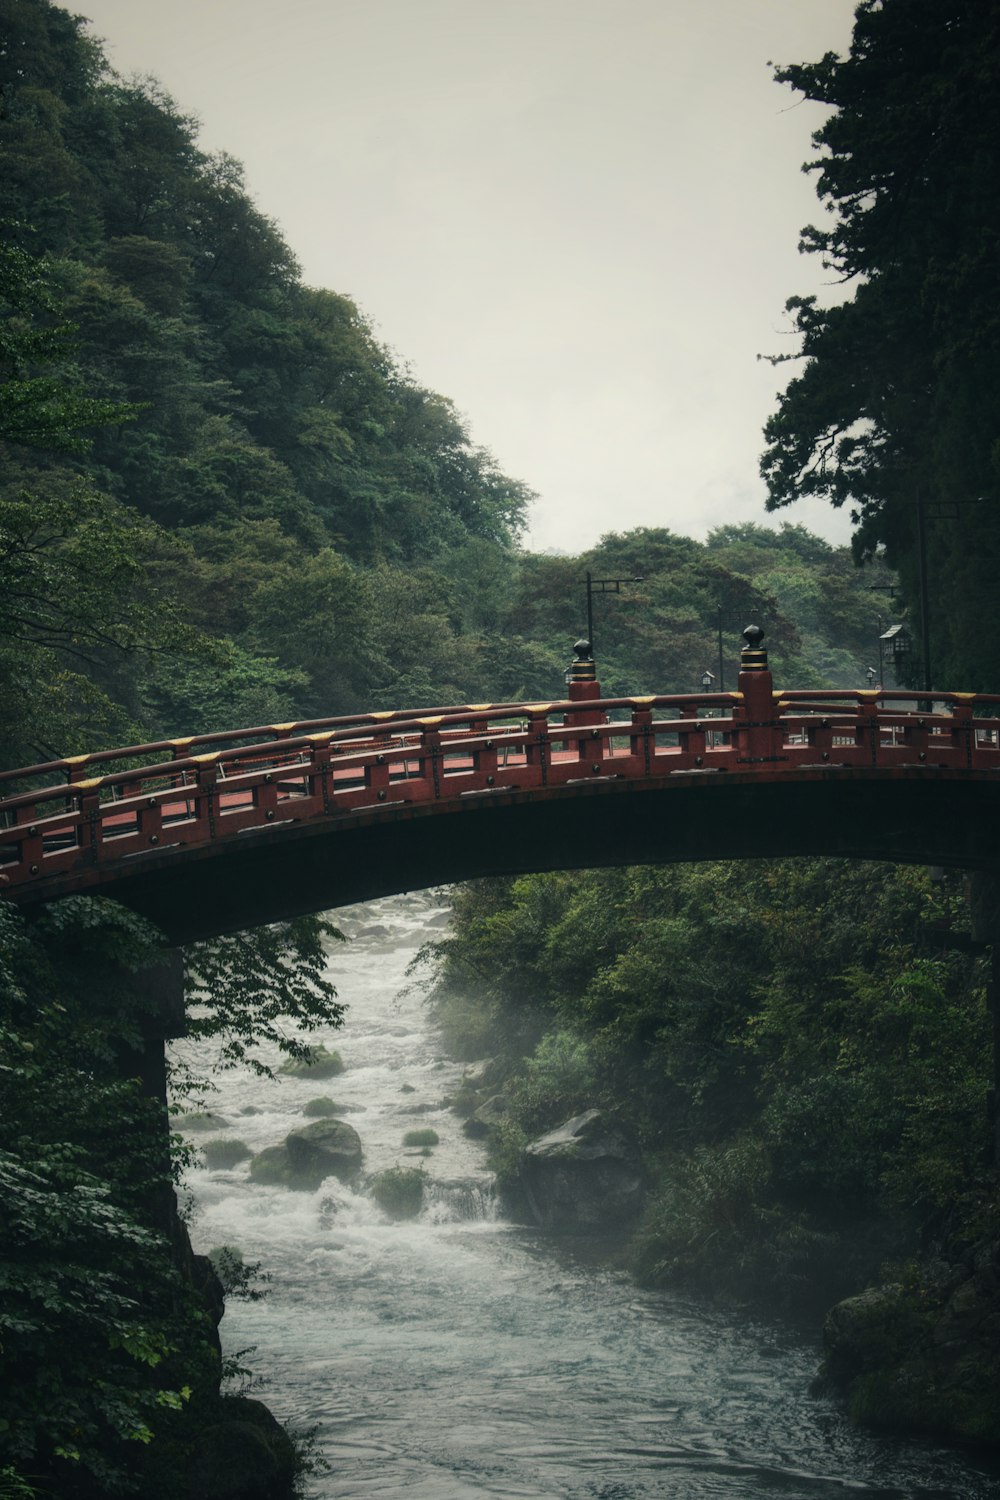 a bridge over a river with a person standing on it